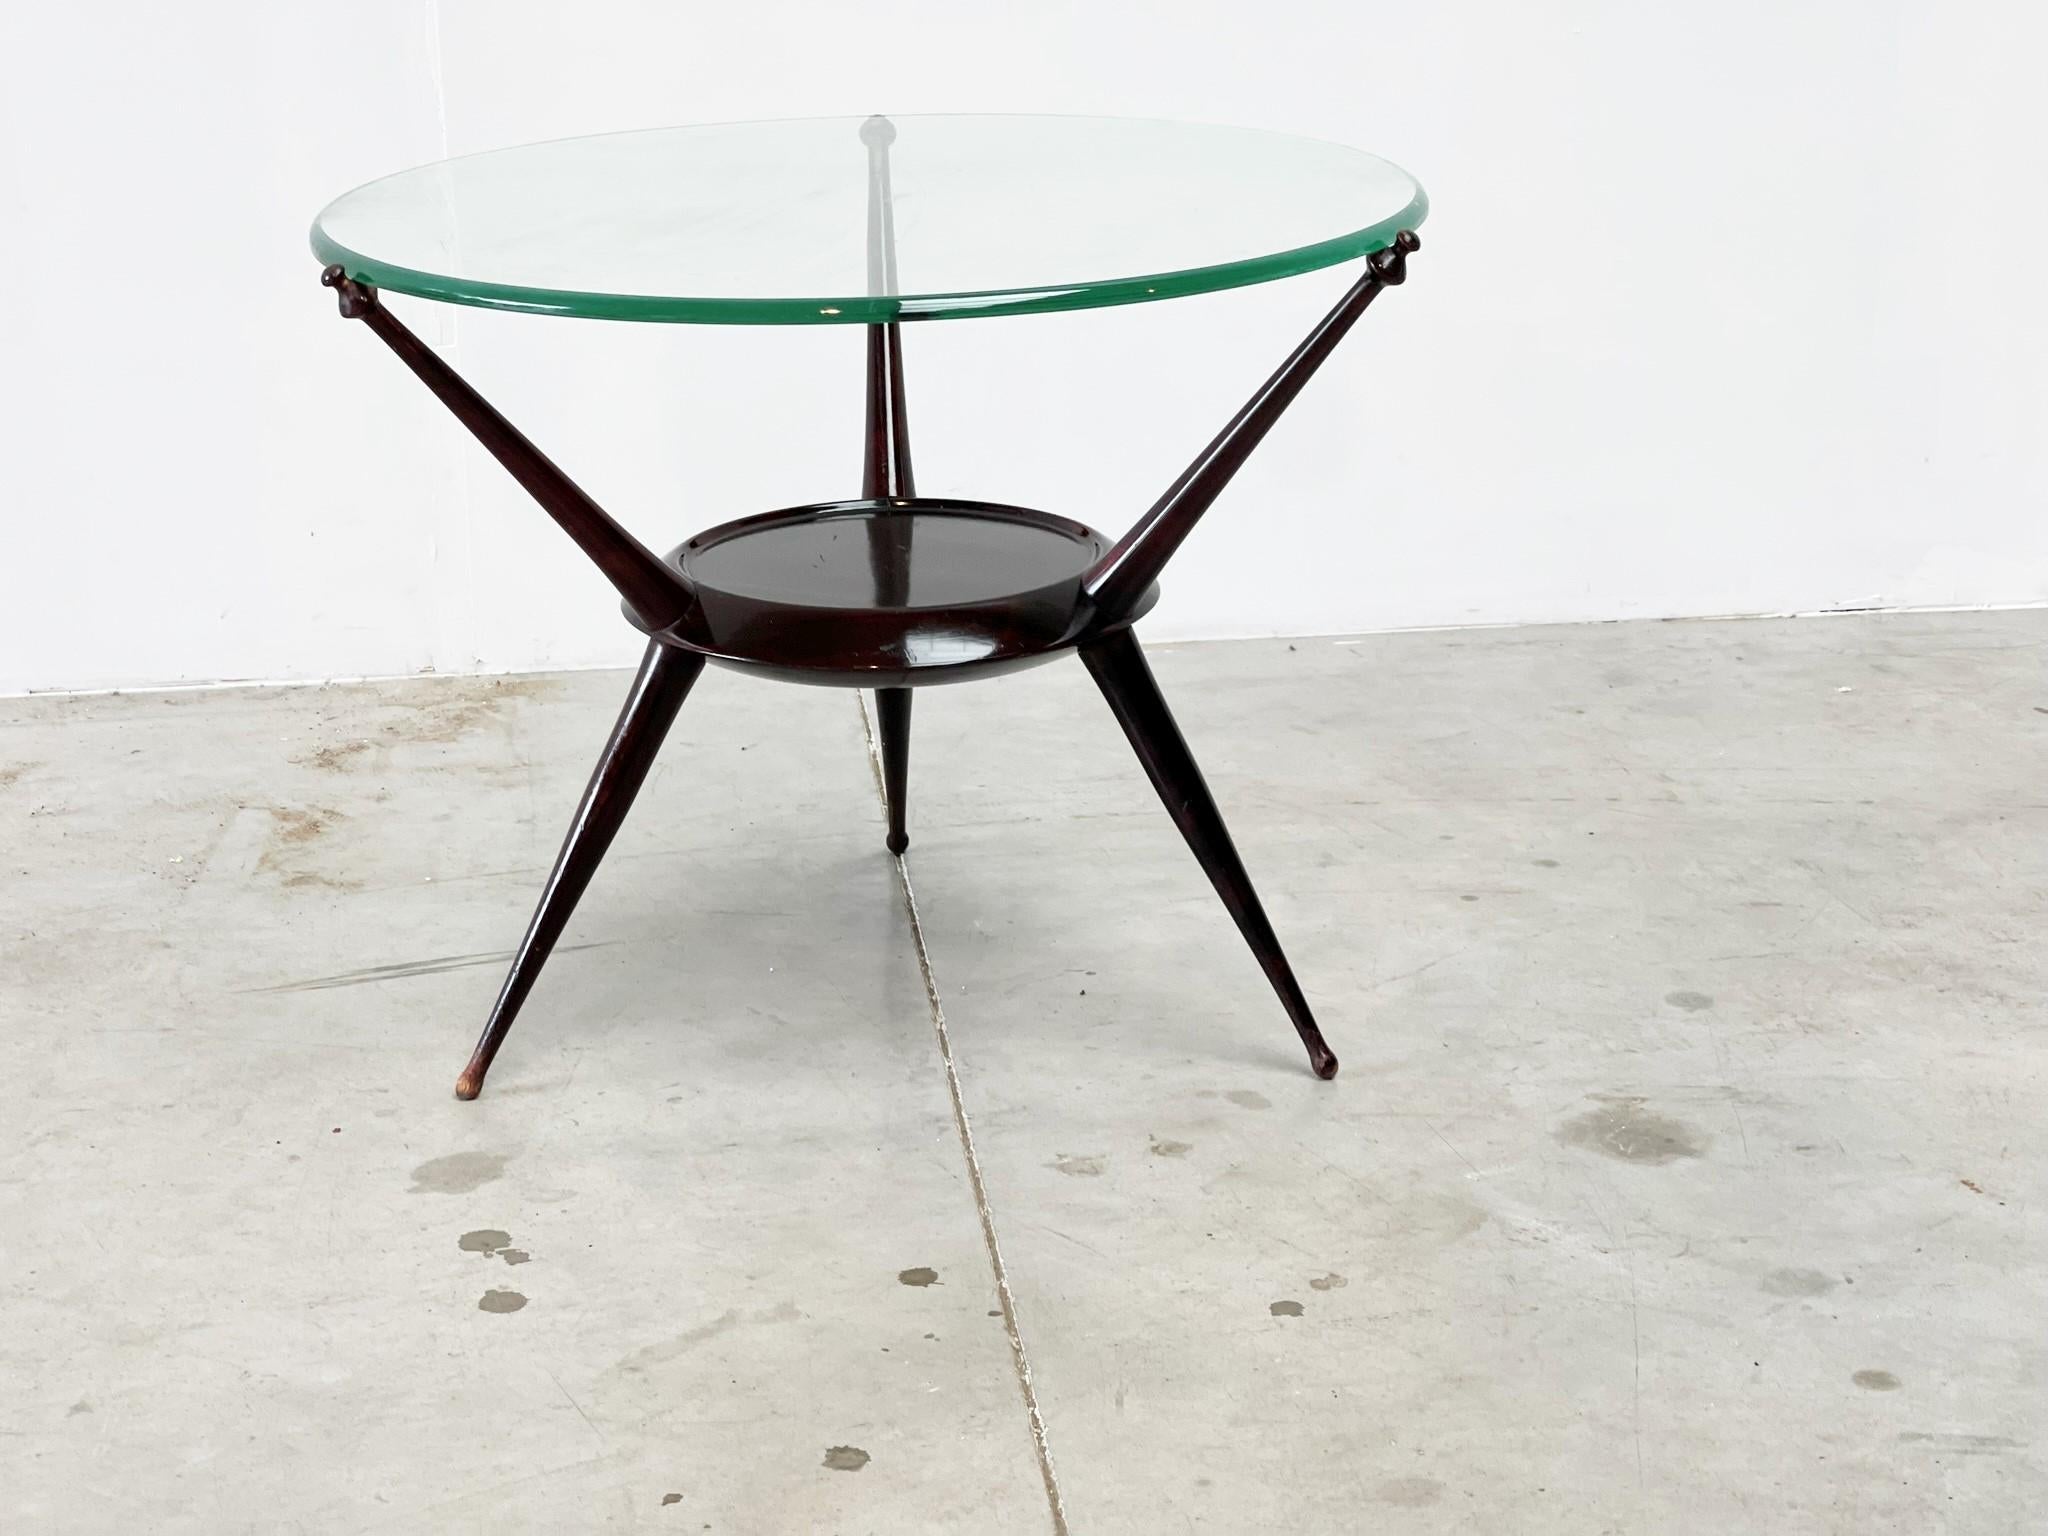 Elegant mid century tripod coffee table. Beautiful very dark brown table base with a nice clear glass round top.

Beautifully crafted table legs.

1950s - Italy

Good condition

Dimensions:
Widt: 65cm/25.59